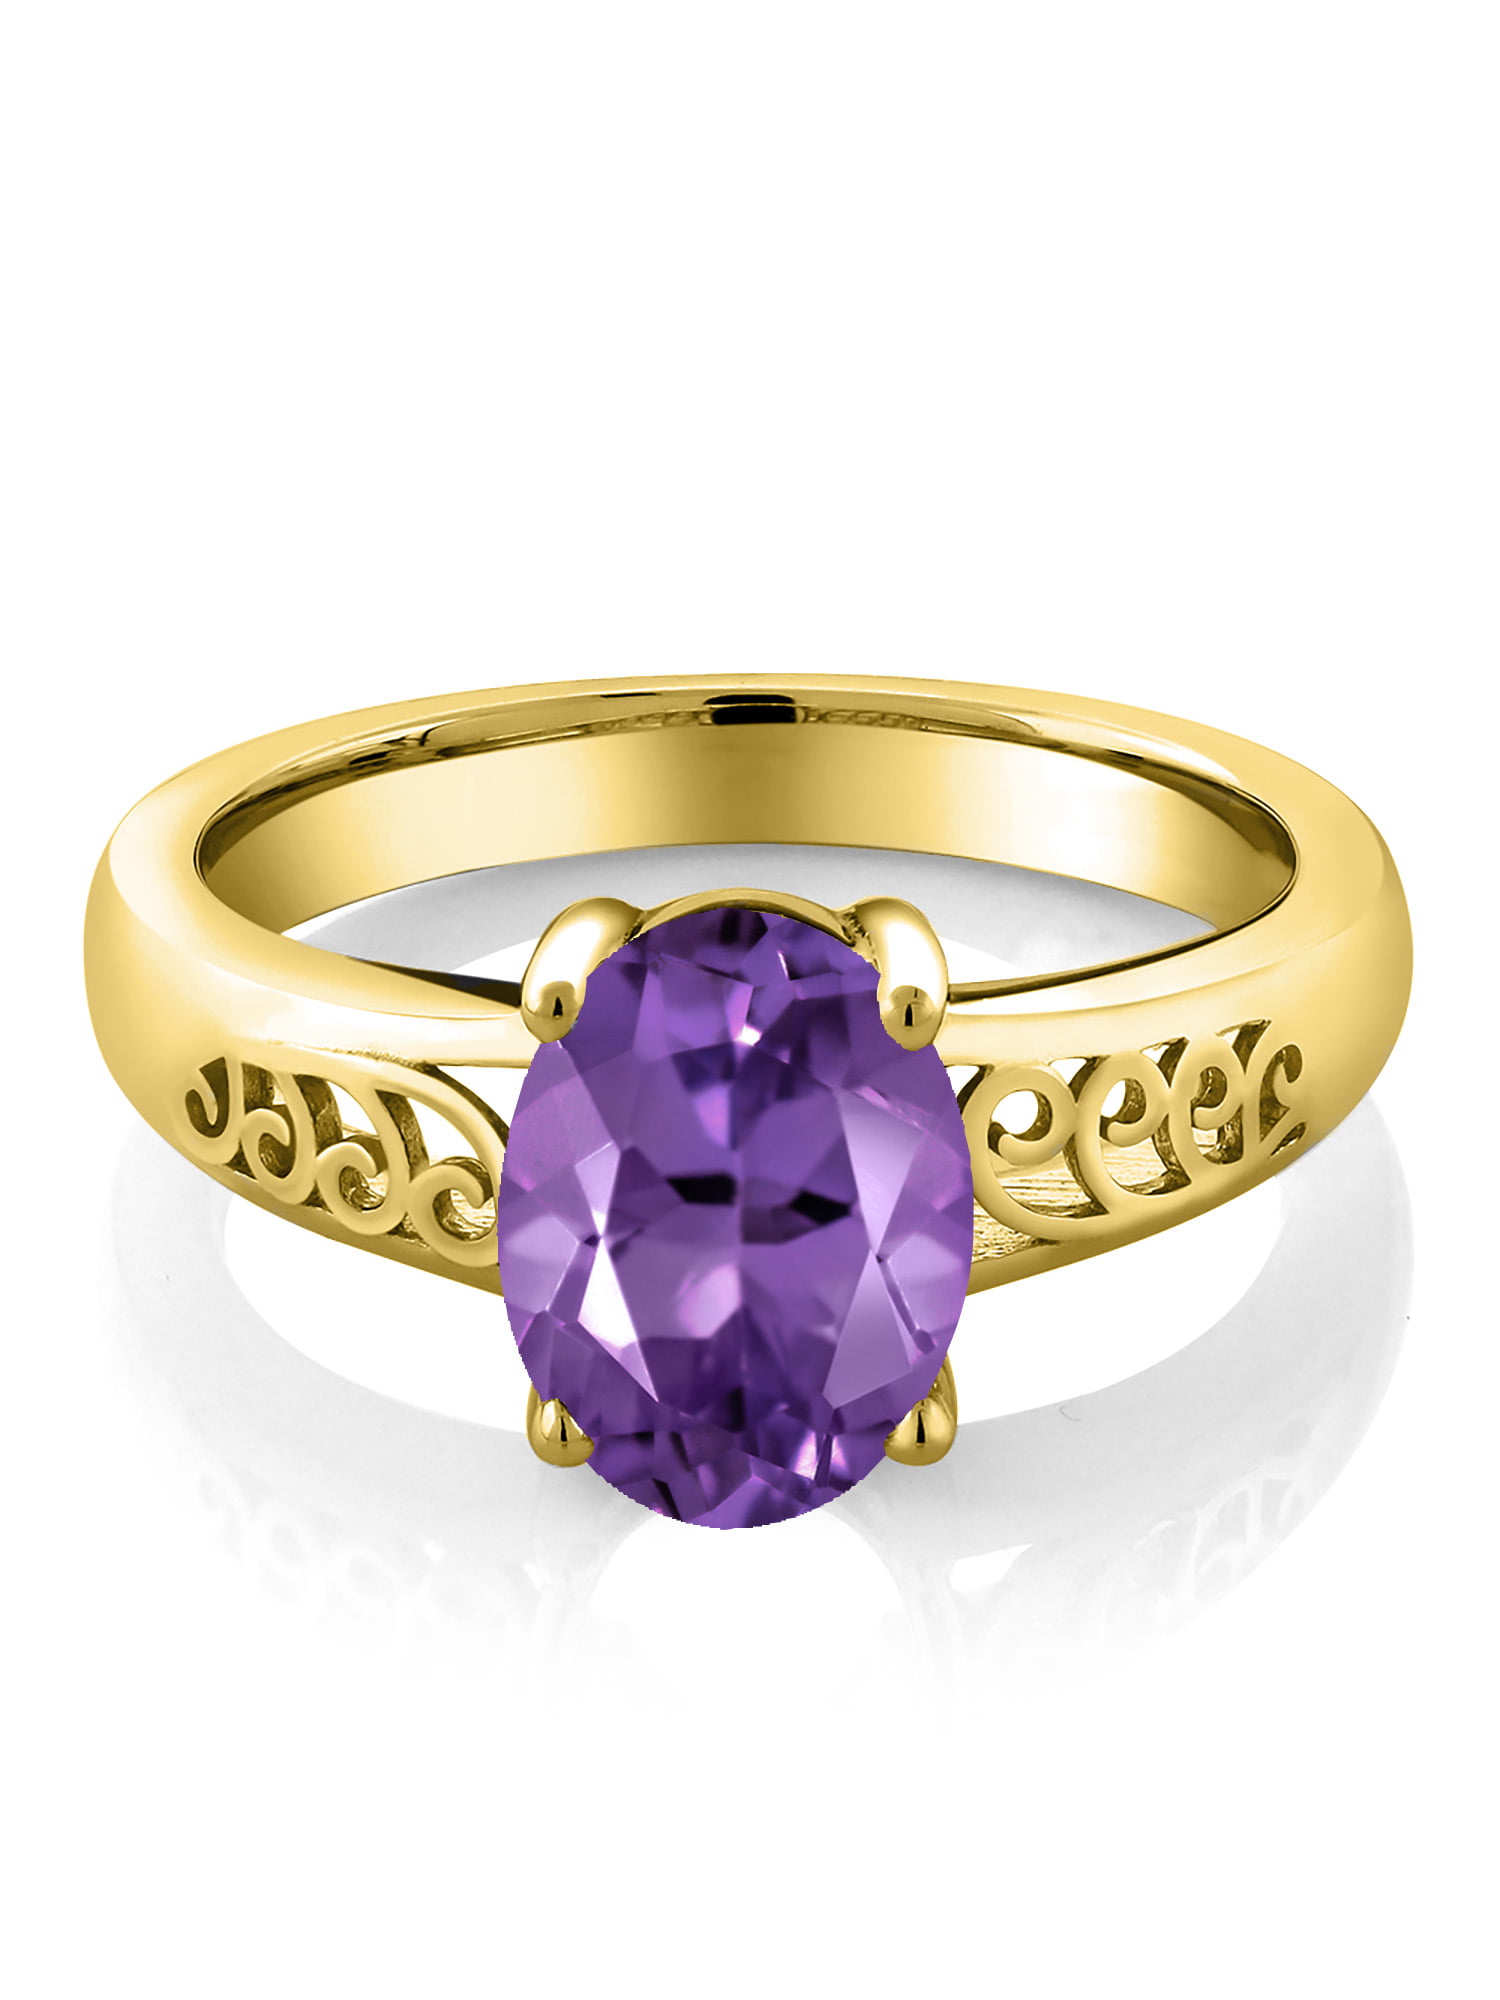 5 x 3 MM ctw 14k Gold Oval Purple Amethyst and Diamond Fashion Cocktail Anniversary Ring 0.18 Carat